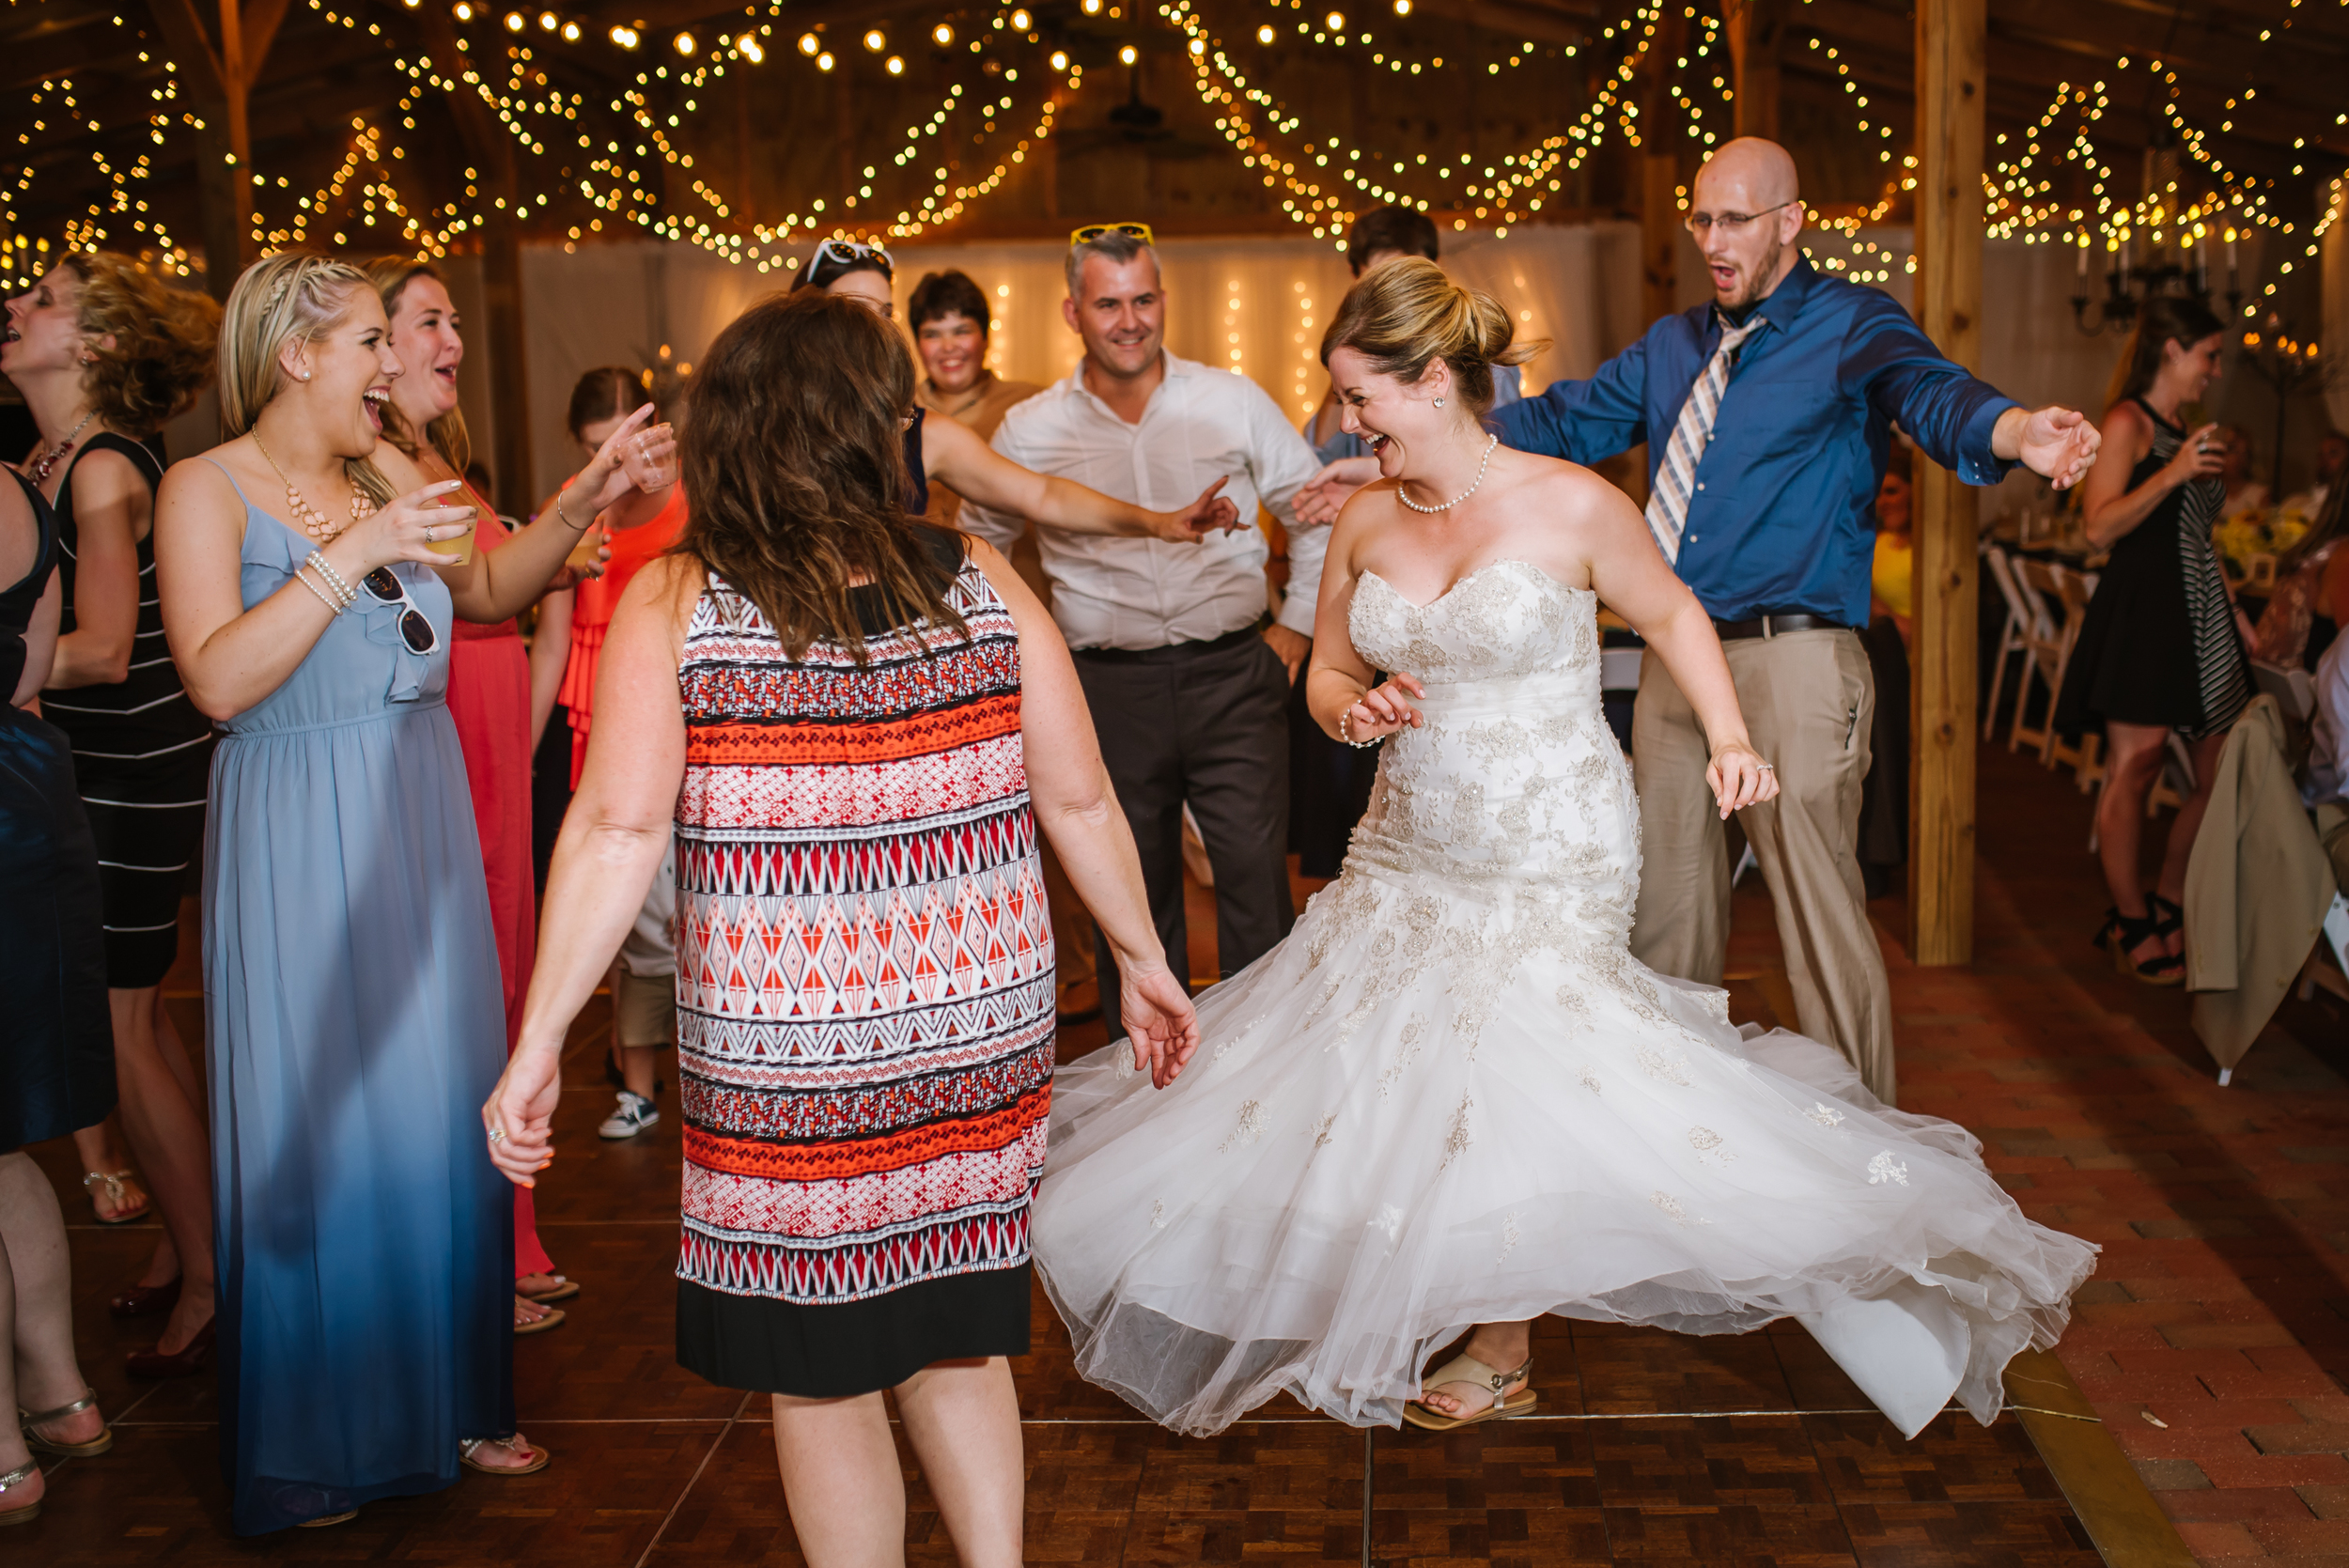 Then it was Tricia &amp; Ryan's wedding day at the Cross Creek Ranch. They had the most tearful and joyful first look! But everything else was all smiles and jokes. This image of Tricia doing her famous 360 move is my absolute fav!&nbsp;